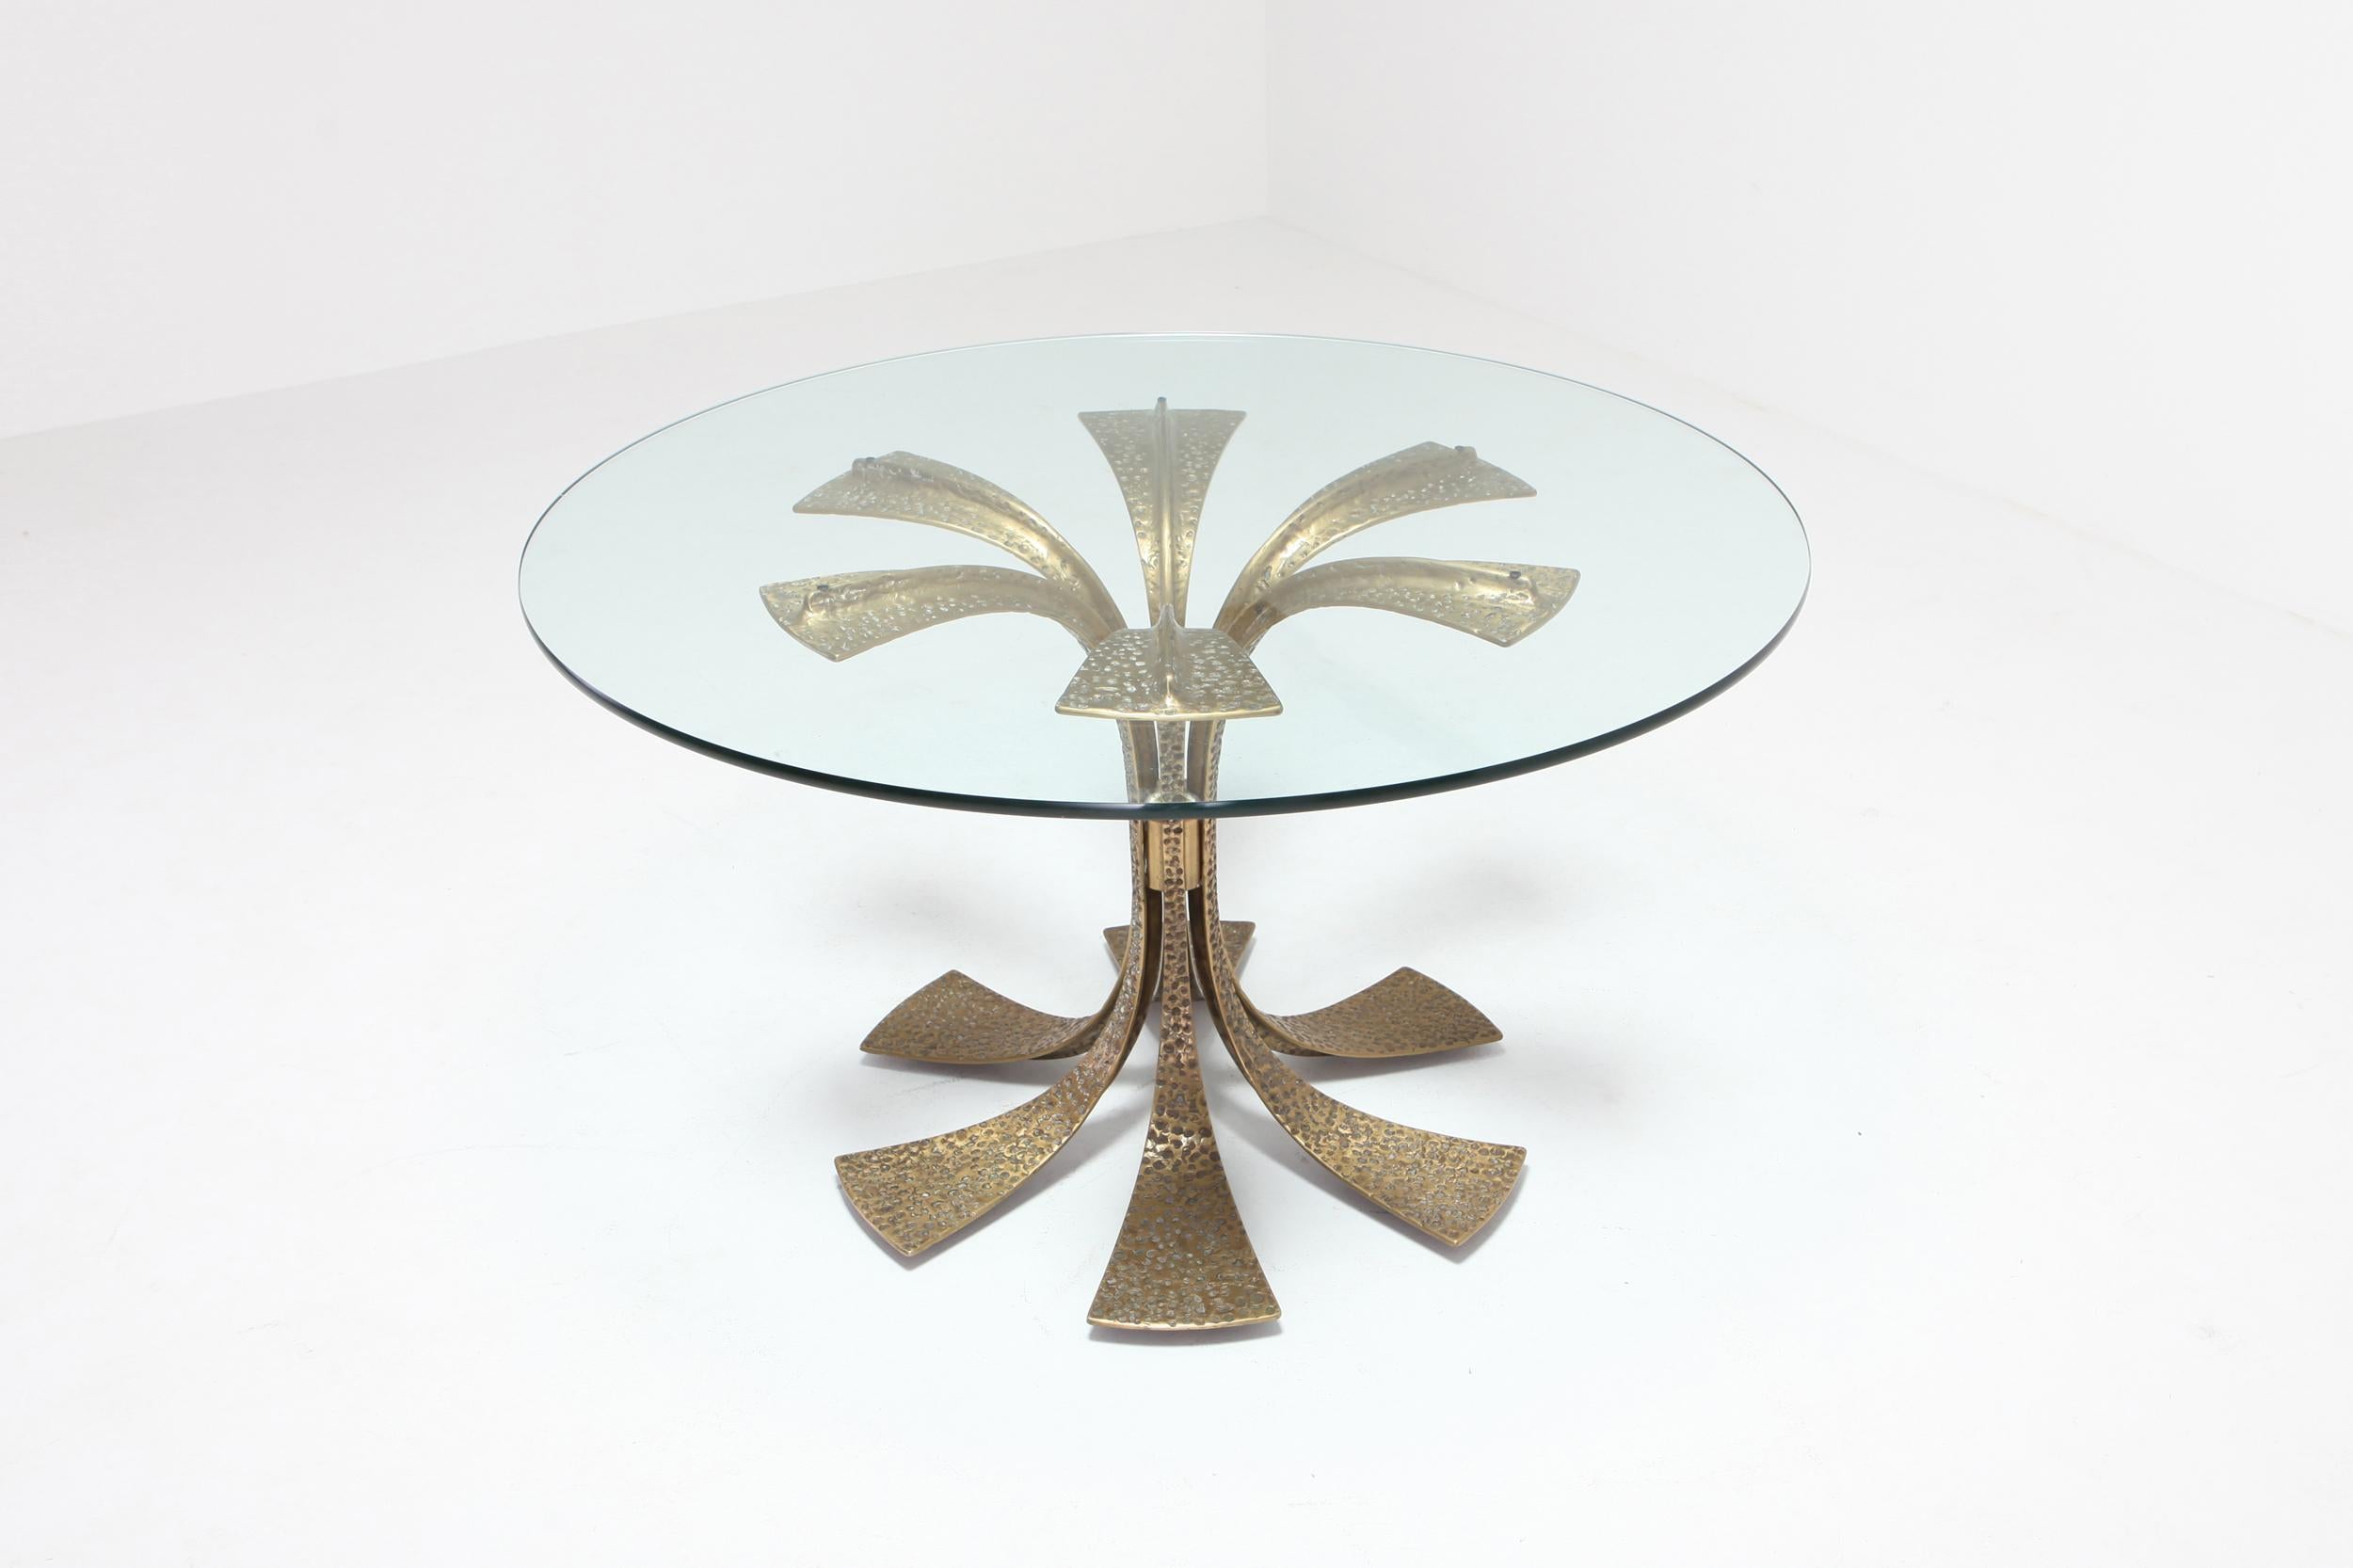 European Hollywood Regency Hammered Brass Dining Table by Luciano Frigerio